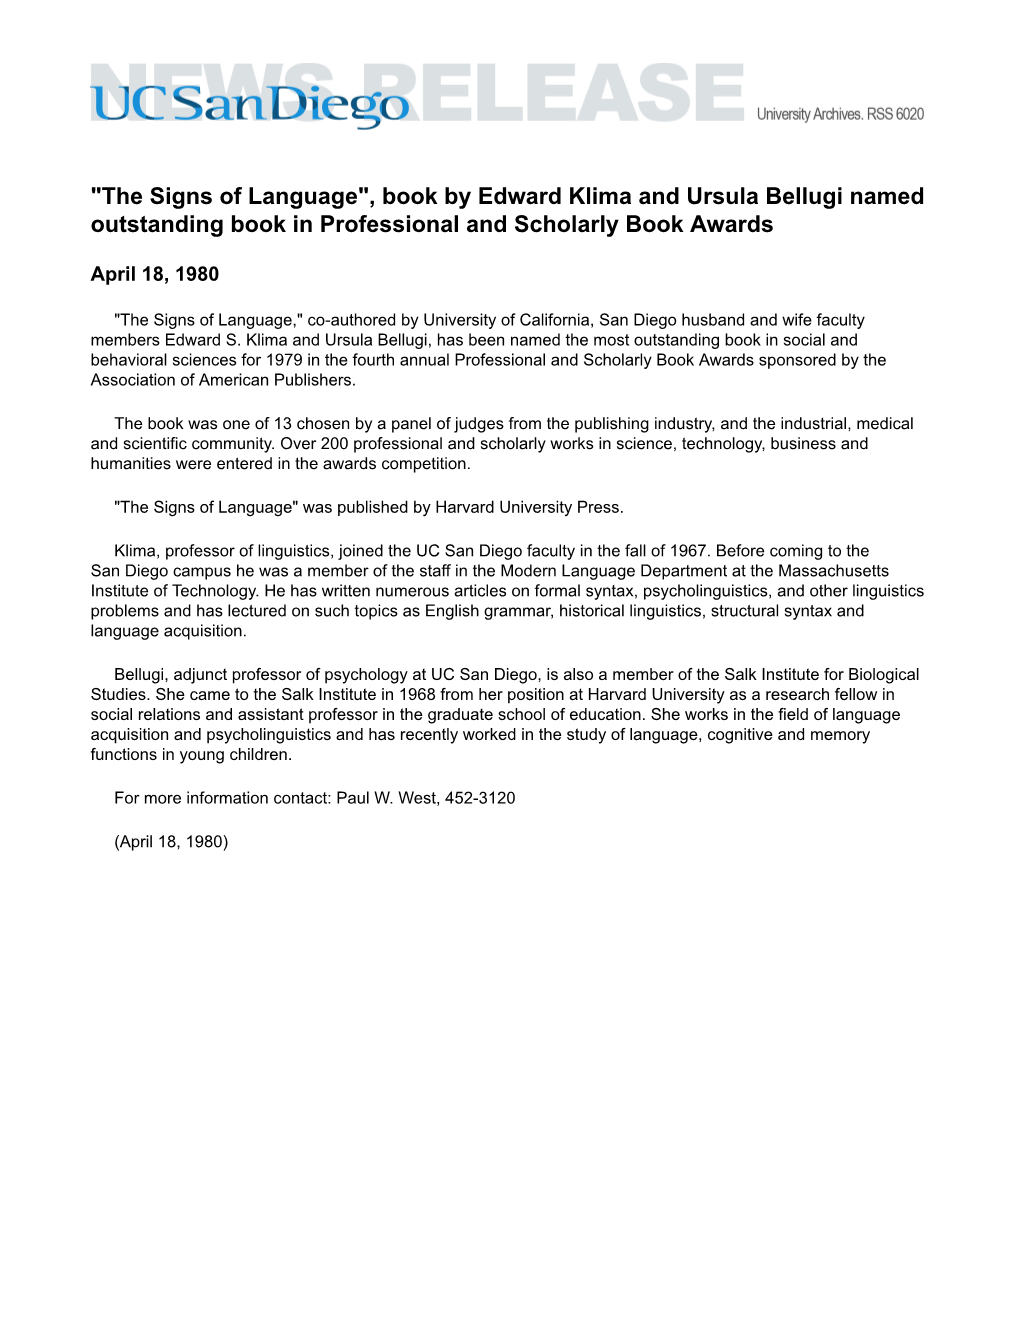 "The Signs of Language", Book by Edward Klima and Ursula Bellugi Named Outstanding Book in Professional and Scholarly Book Awards